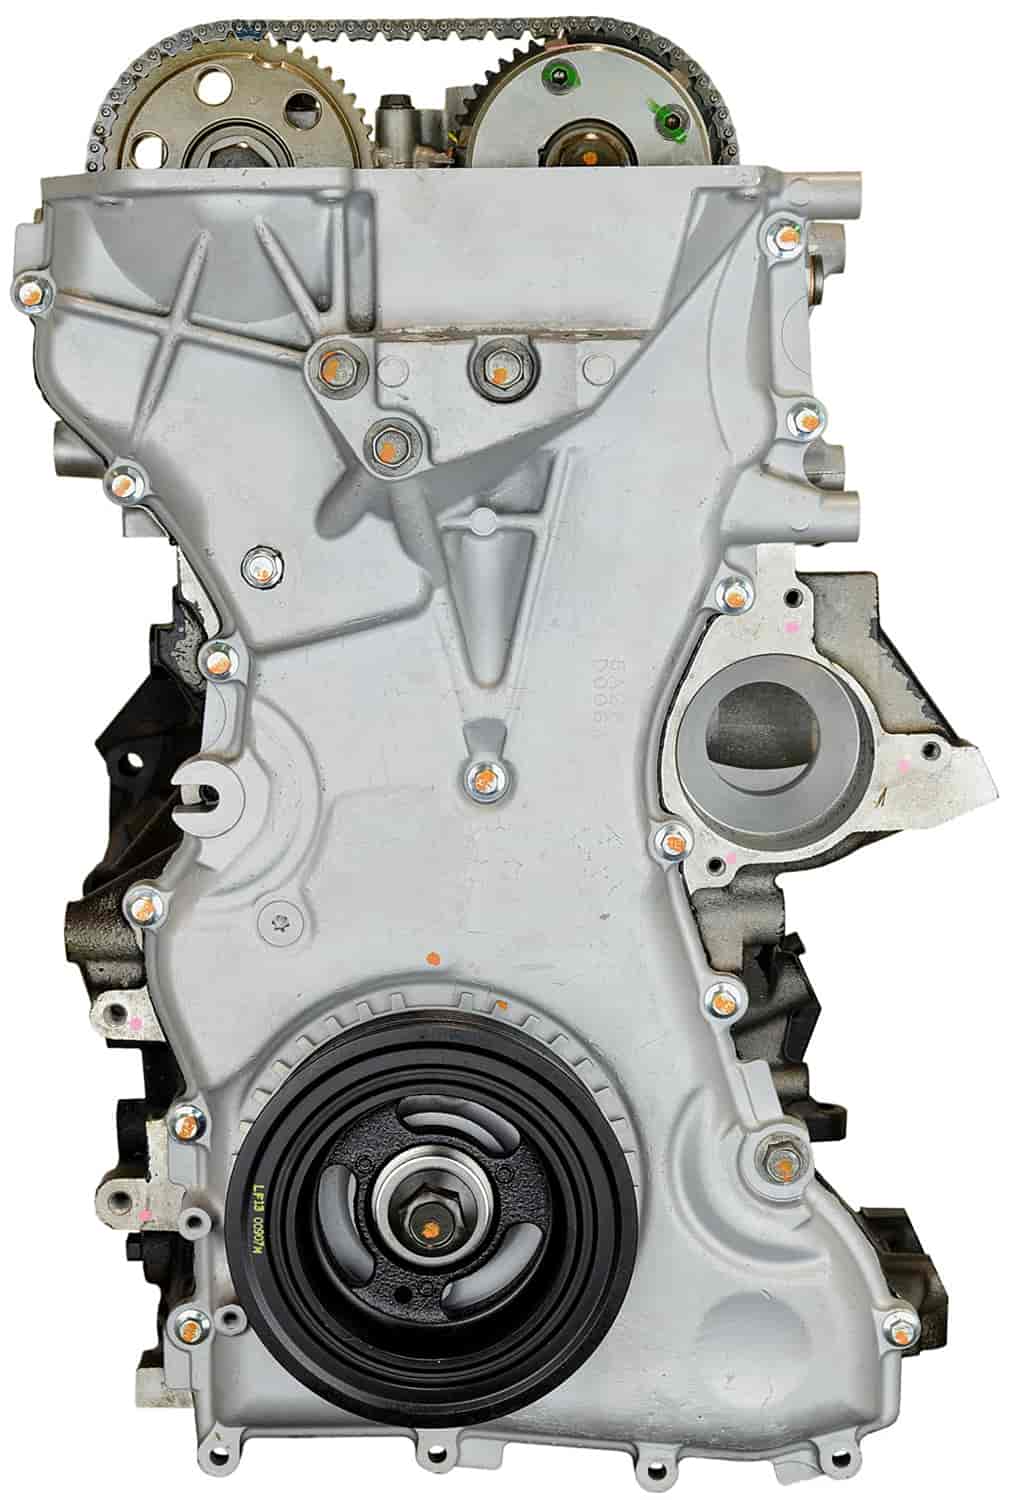 Remanufactured Crate Engine for 2004-2007 Mazda 3 &